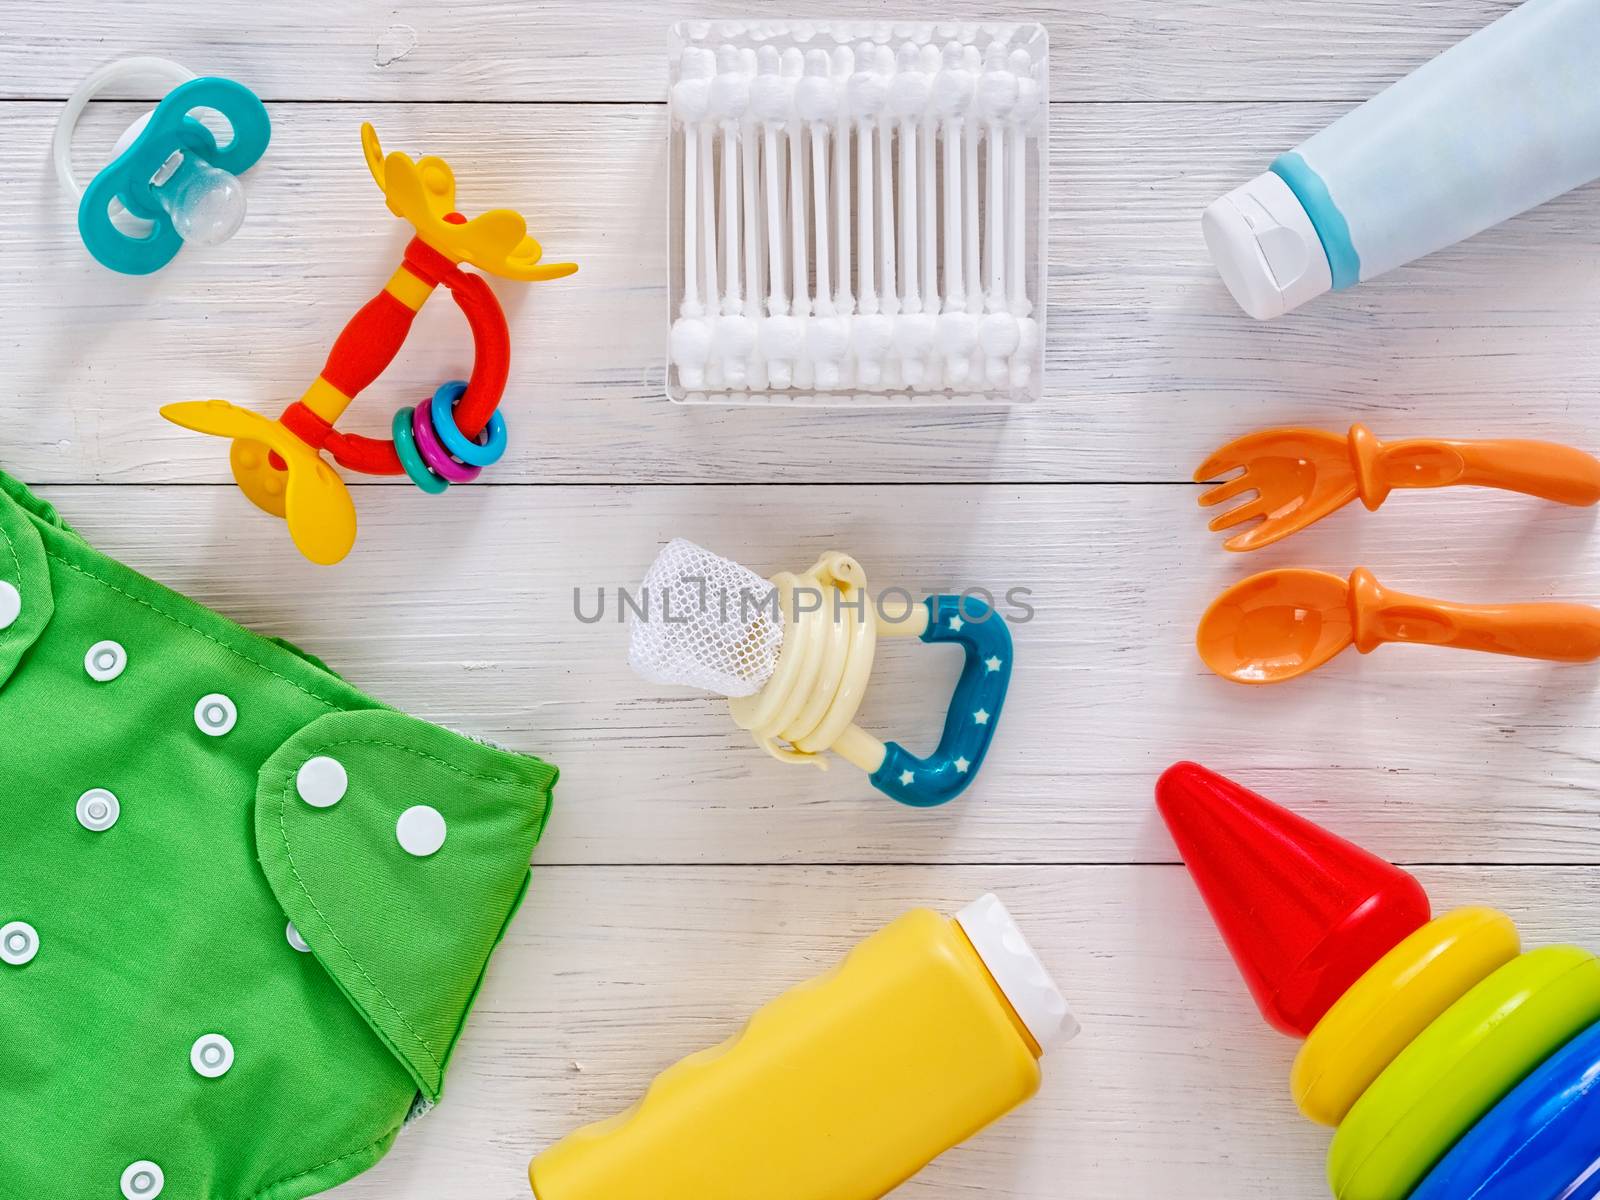 Collection of items for babies: cloth diaper, baby powder, nibbler, cream, teether, soother, cotton swabs, baby spoon and fork, pyramid toy on white wooden background. Top view or flat lay